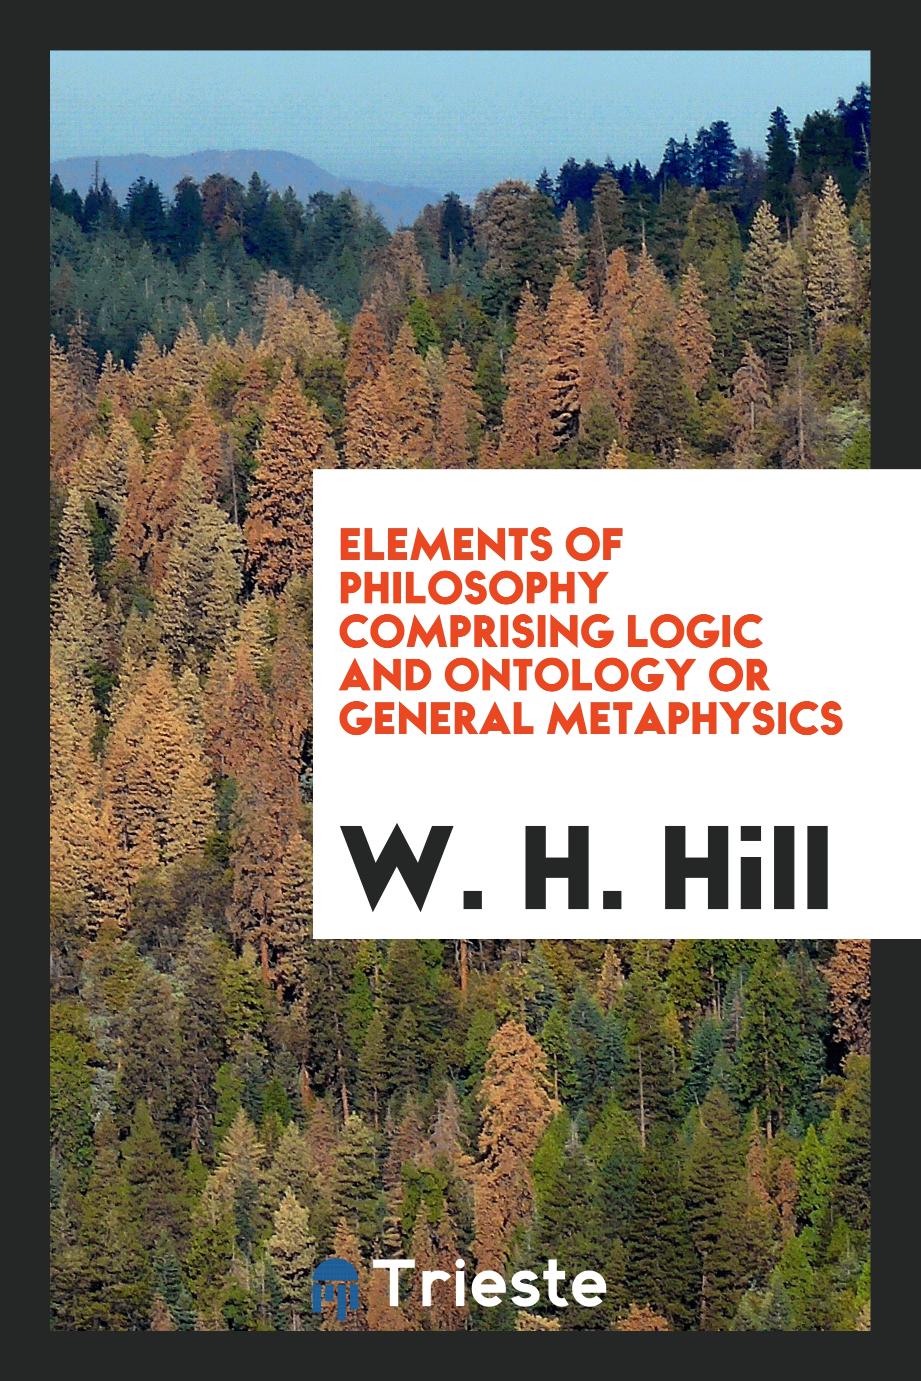 Elements of philosophy comprising logic and ontology or general metaphysics